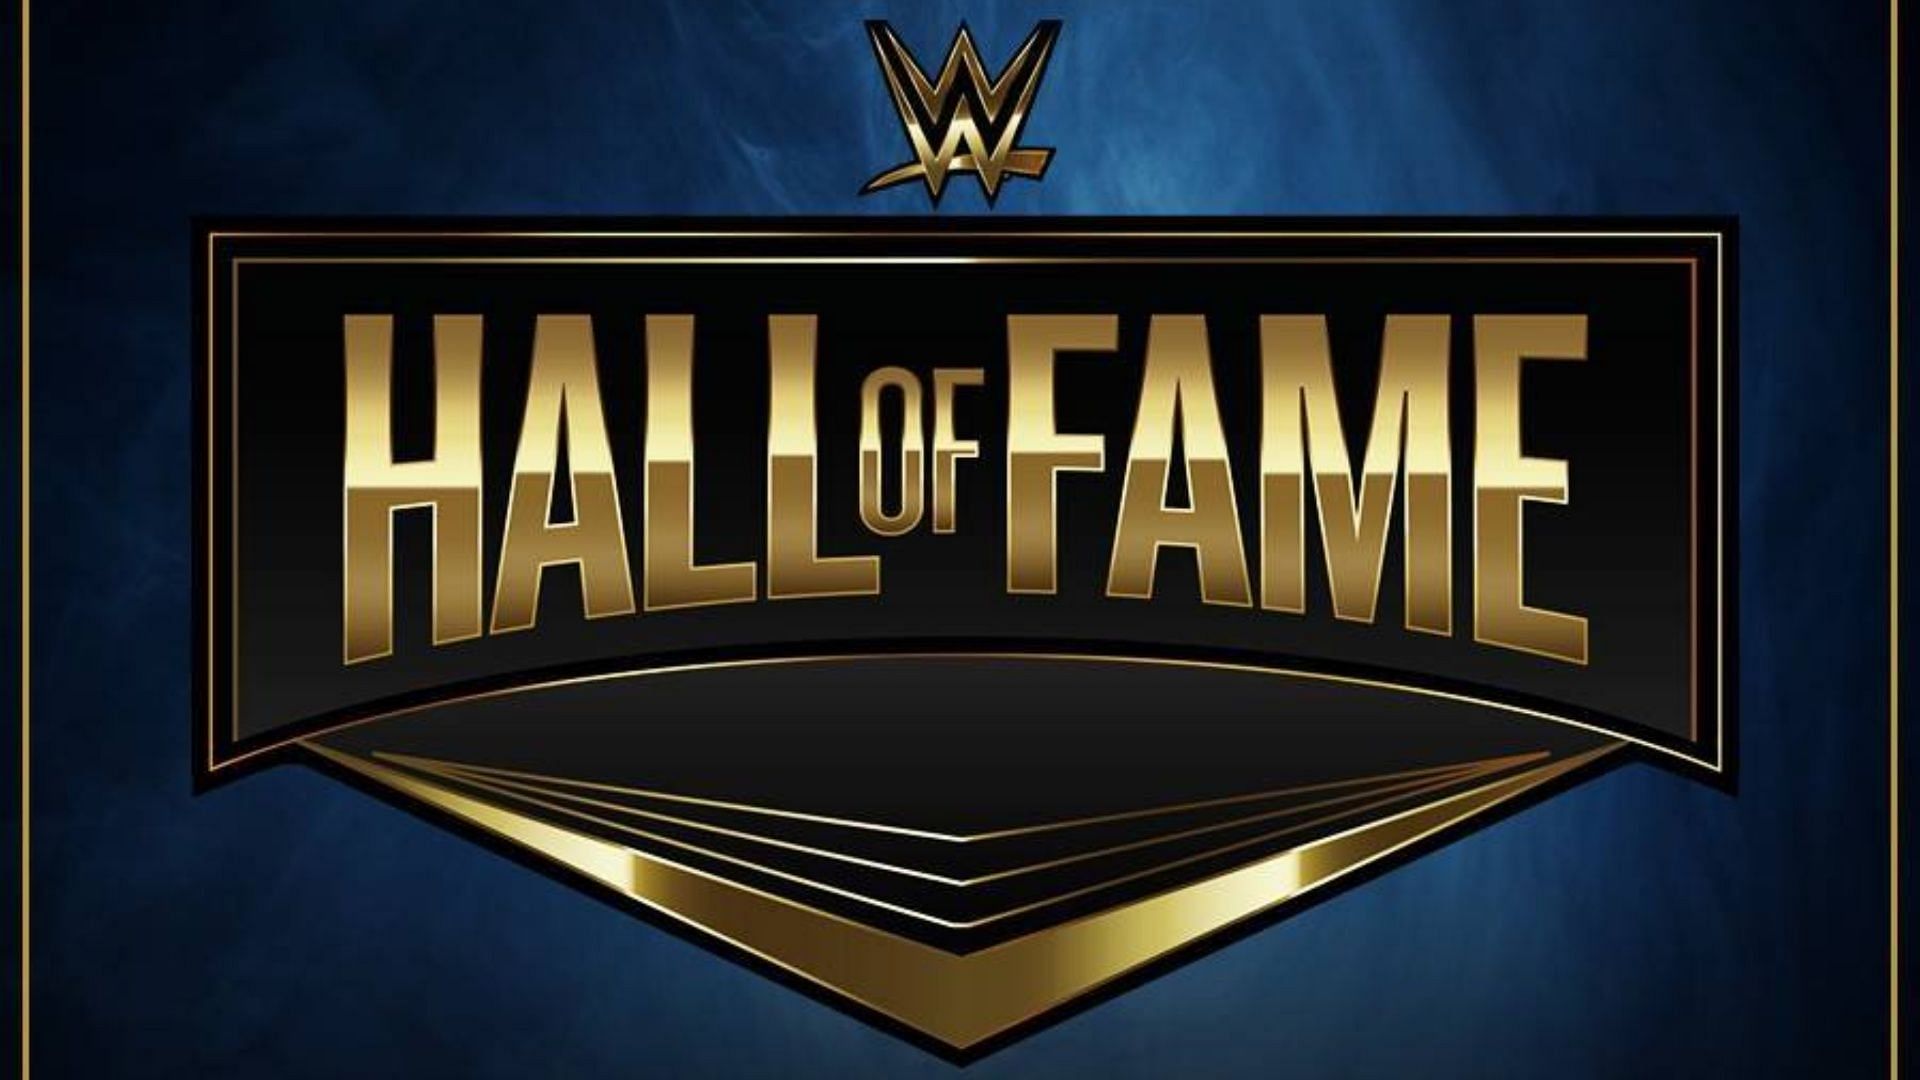 WWE has been using this logo of the Hall of Fame since 2019. 